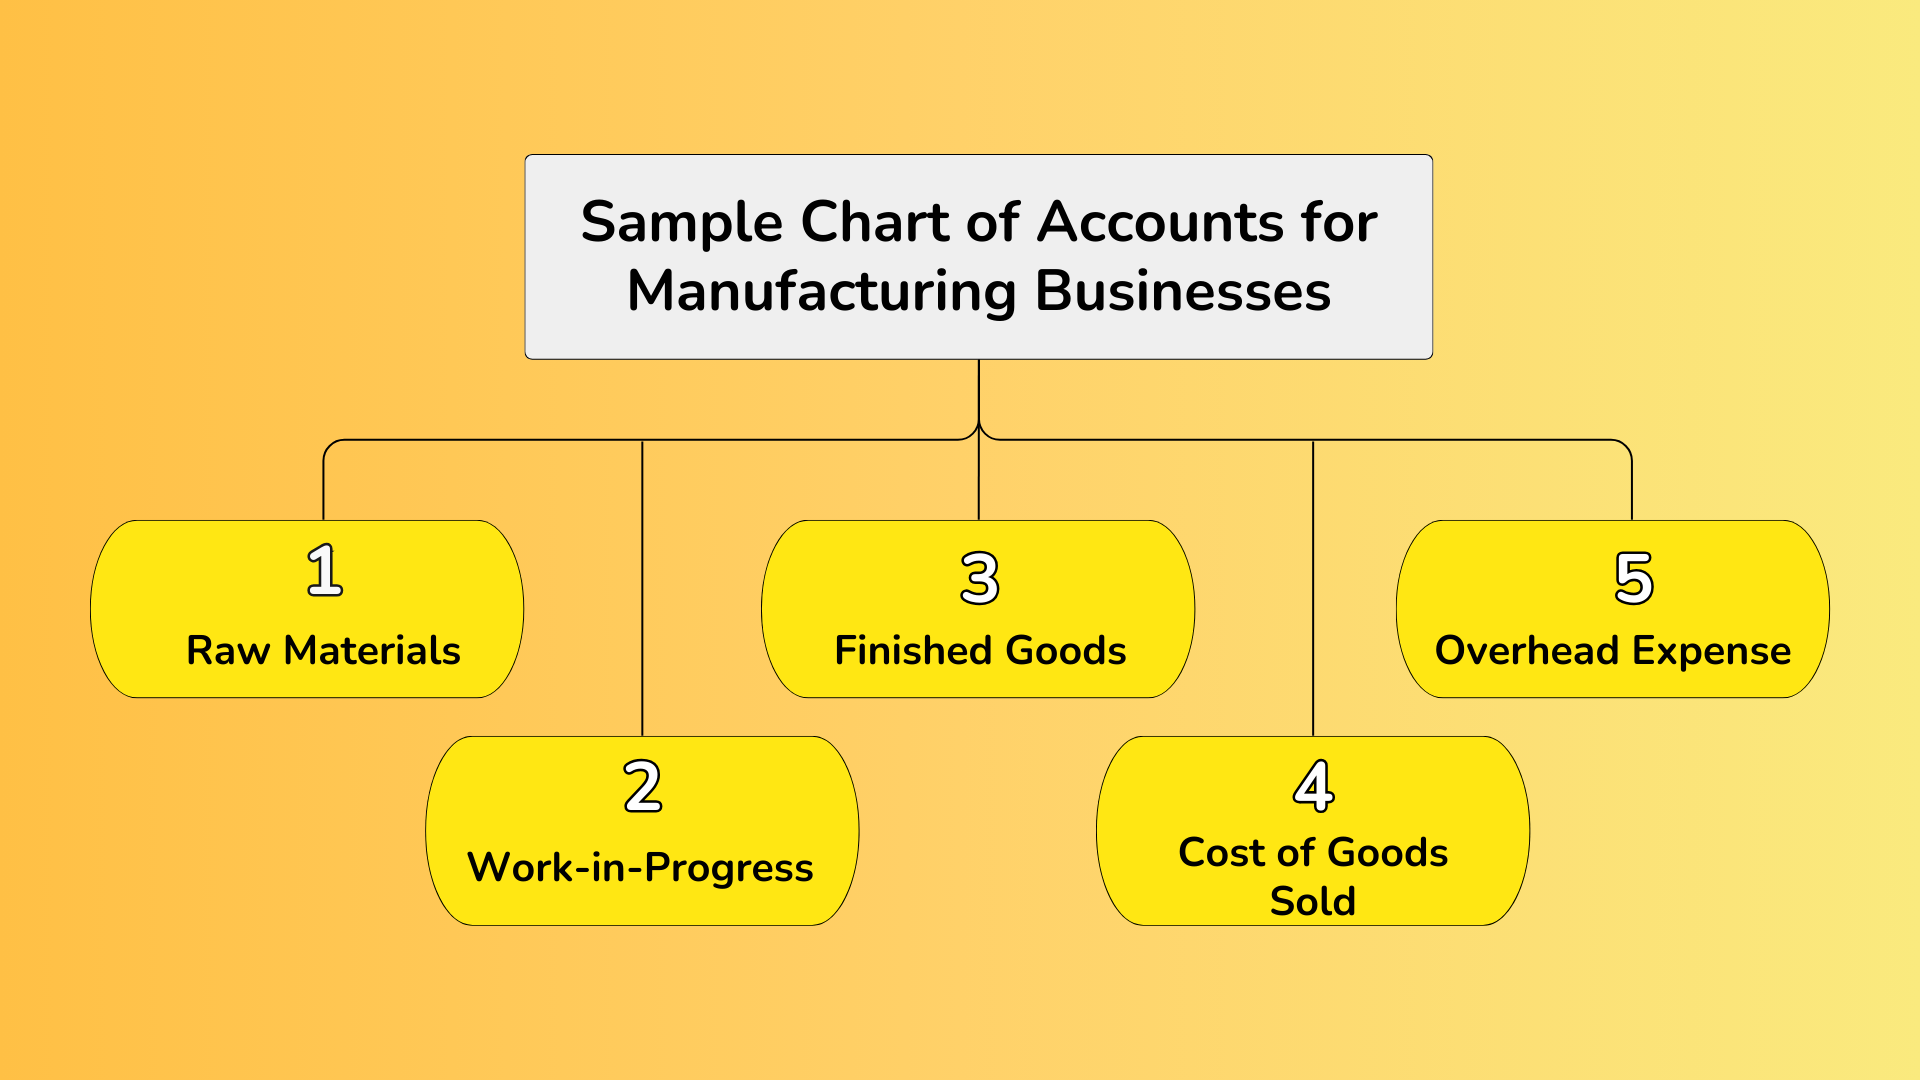 Sample Chart of Accounts for Manufacturing Businesses